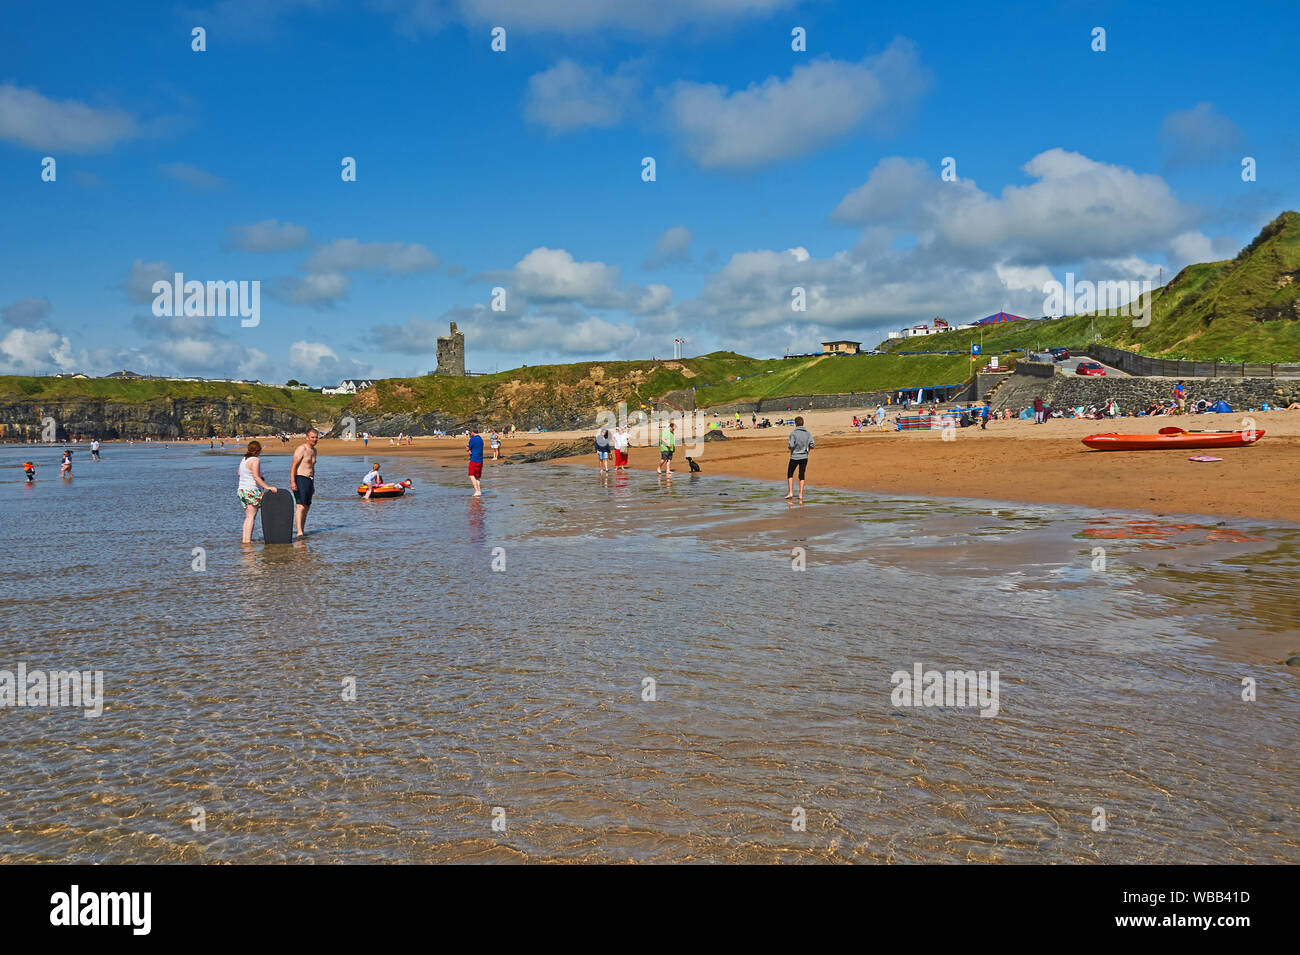 Ballybunion beach on the Atlantic Coast, with tourists and locals paddling in the shallow surf of a calm Atlantic Ocean, County Kerry, Ireland. Stock Photo